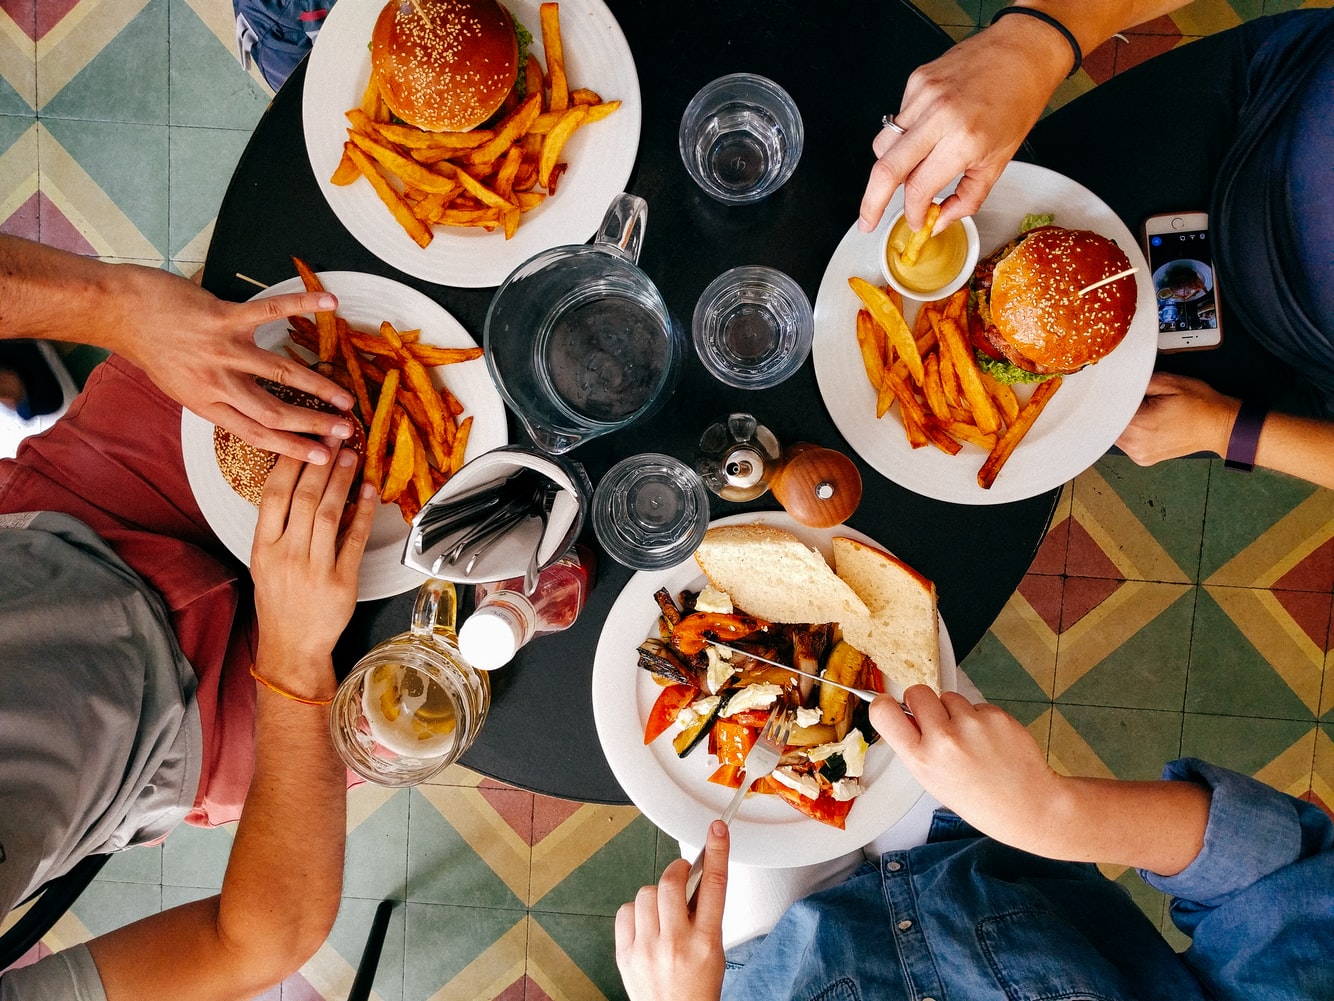 What to Eat When Out With Friends